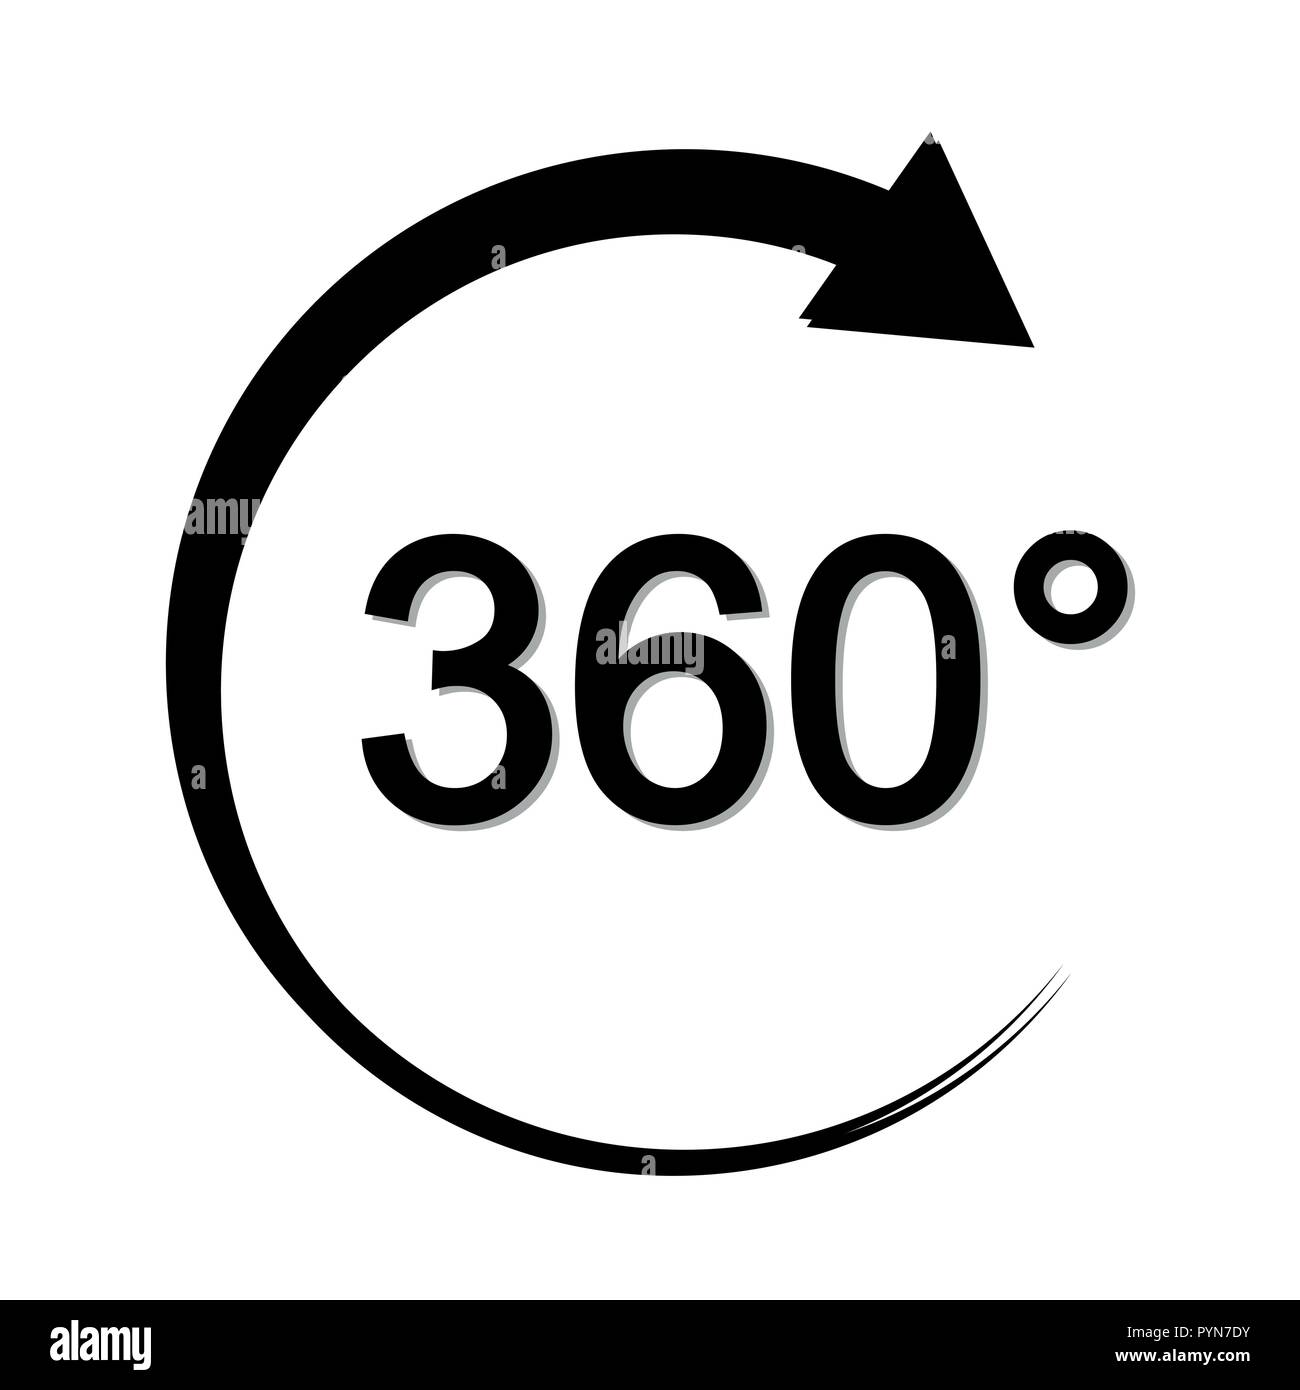 angle 360 degrees sign icon geometry math symbol vector illustration EPS10 Stock Vector